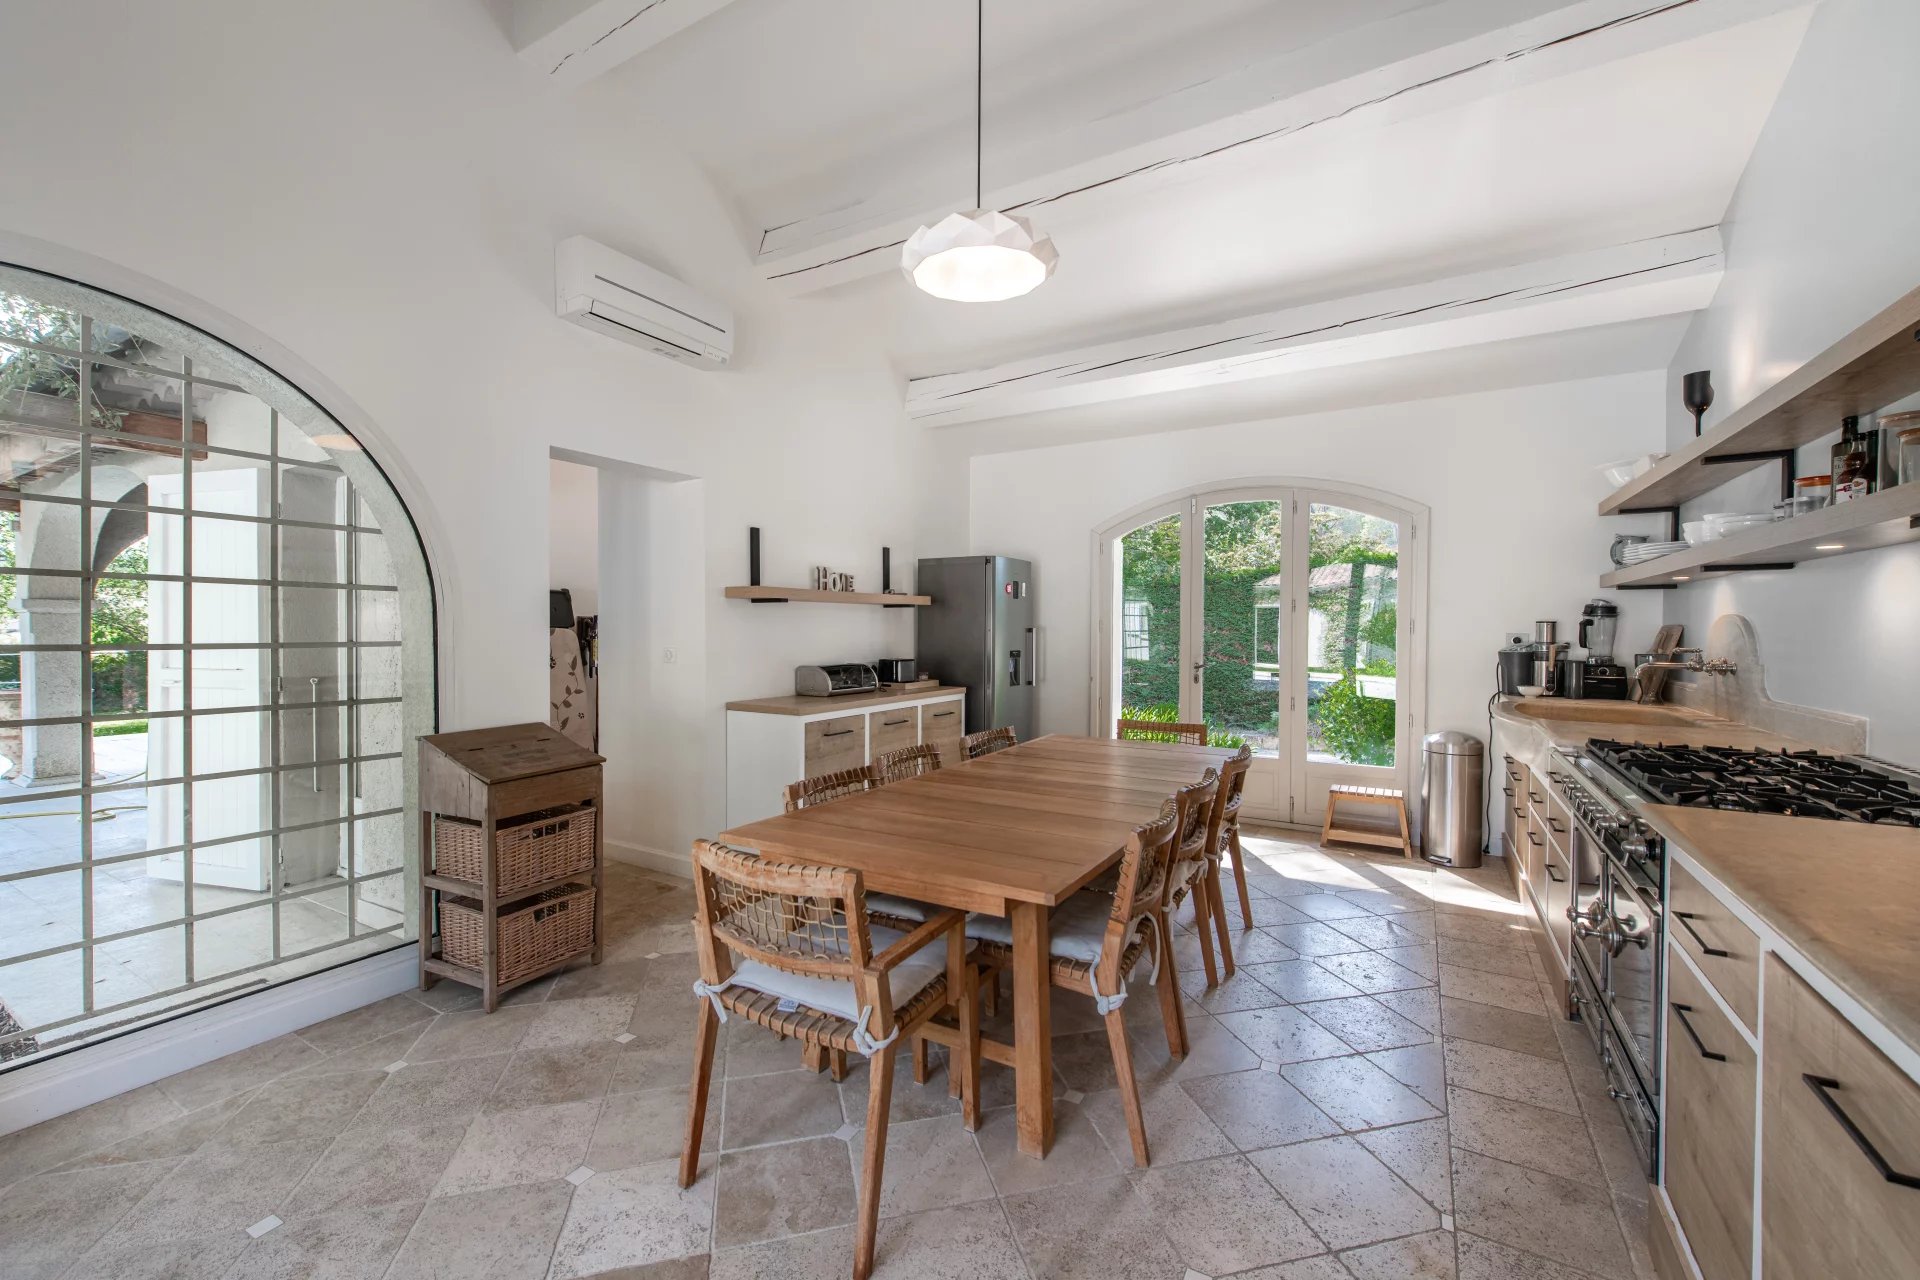 Rare opportunity in the Parc Saint Martin, Mougins